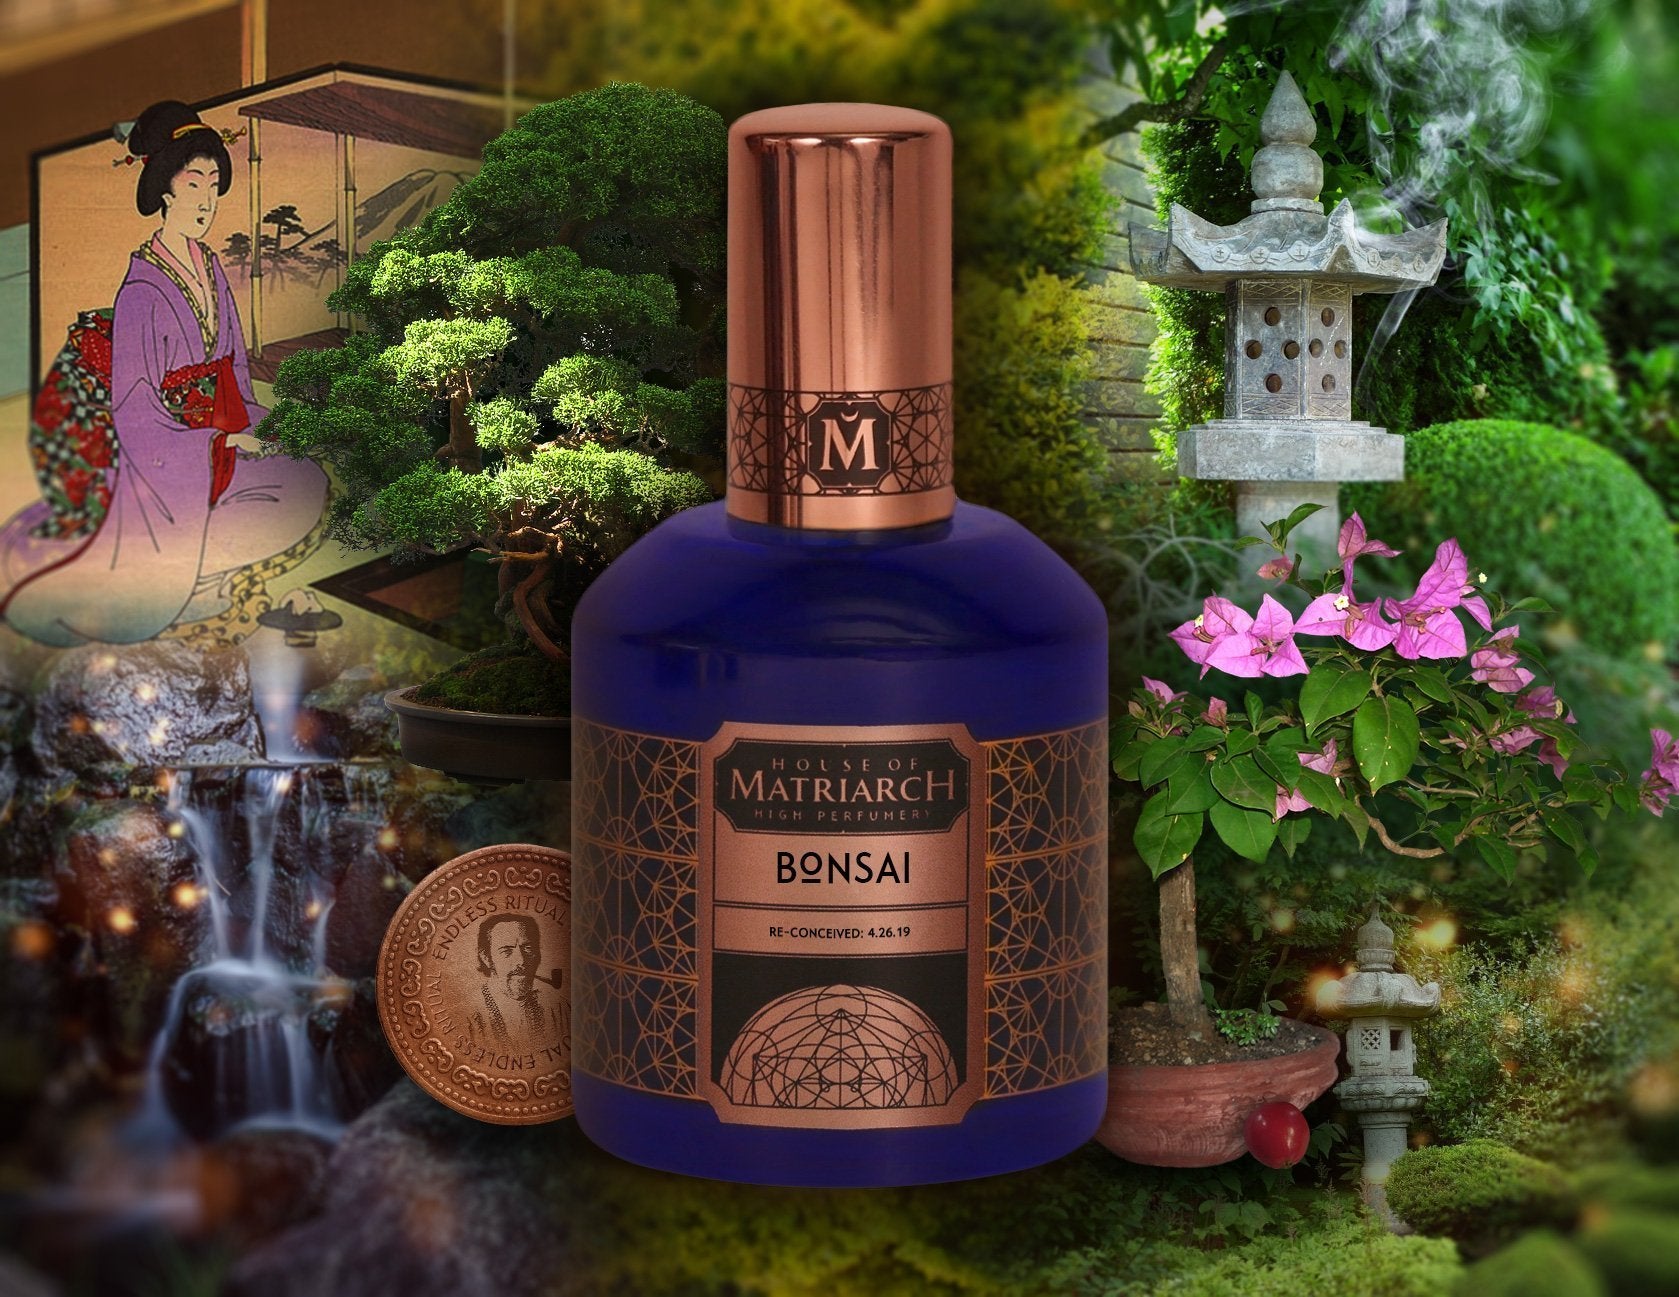 BONSAI - The Fragrance of Zen - NEW HIGH PERFUMERY FROM HOUSE OF MATRIARCH